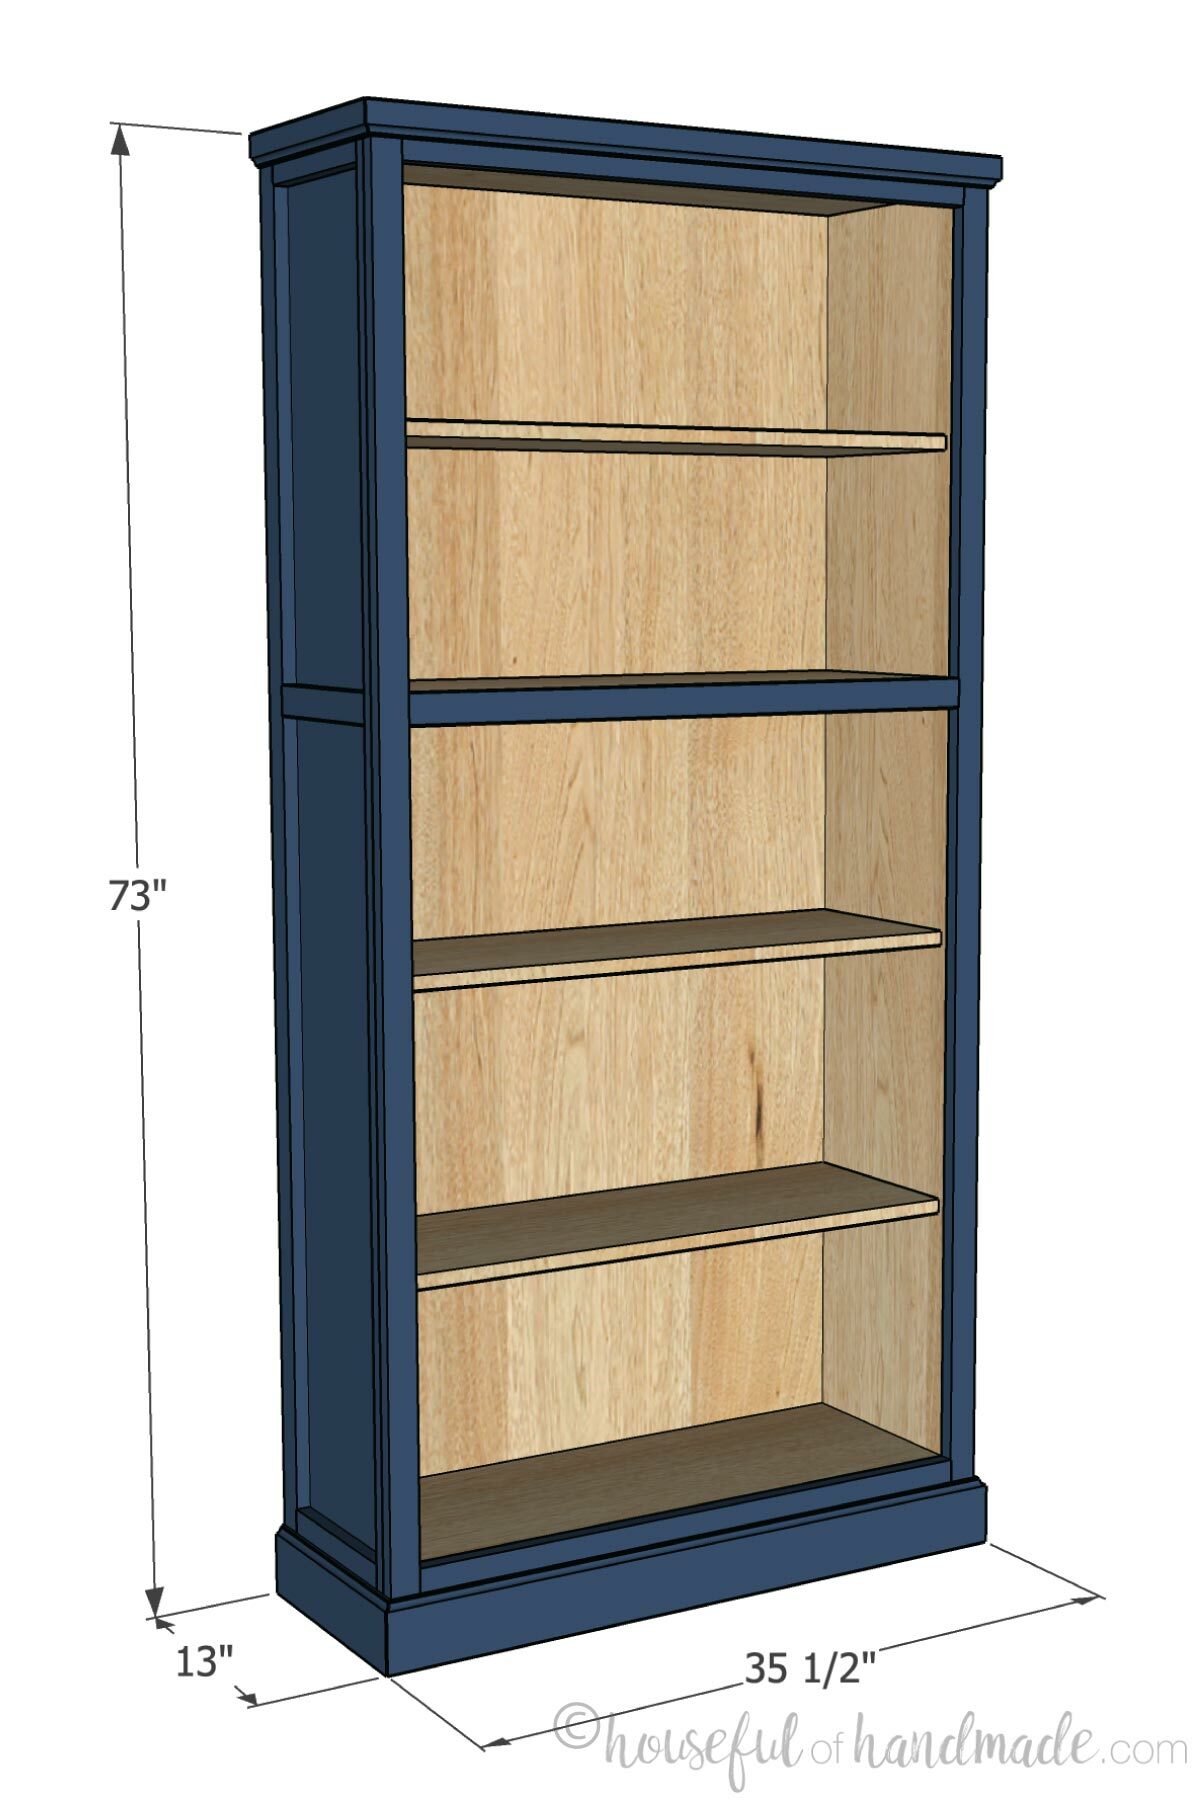 3D sketch of the bookcase with dimensions noted.  